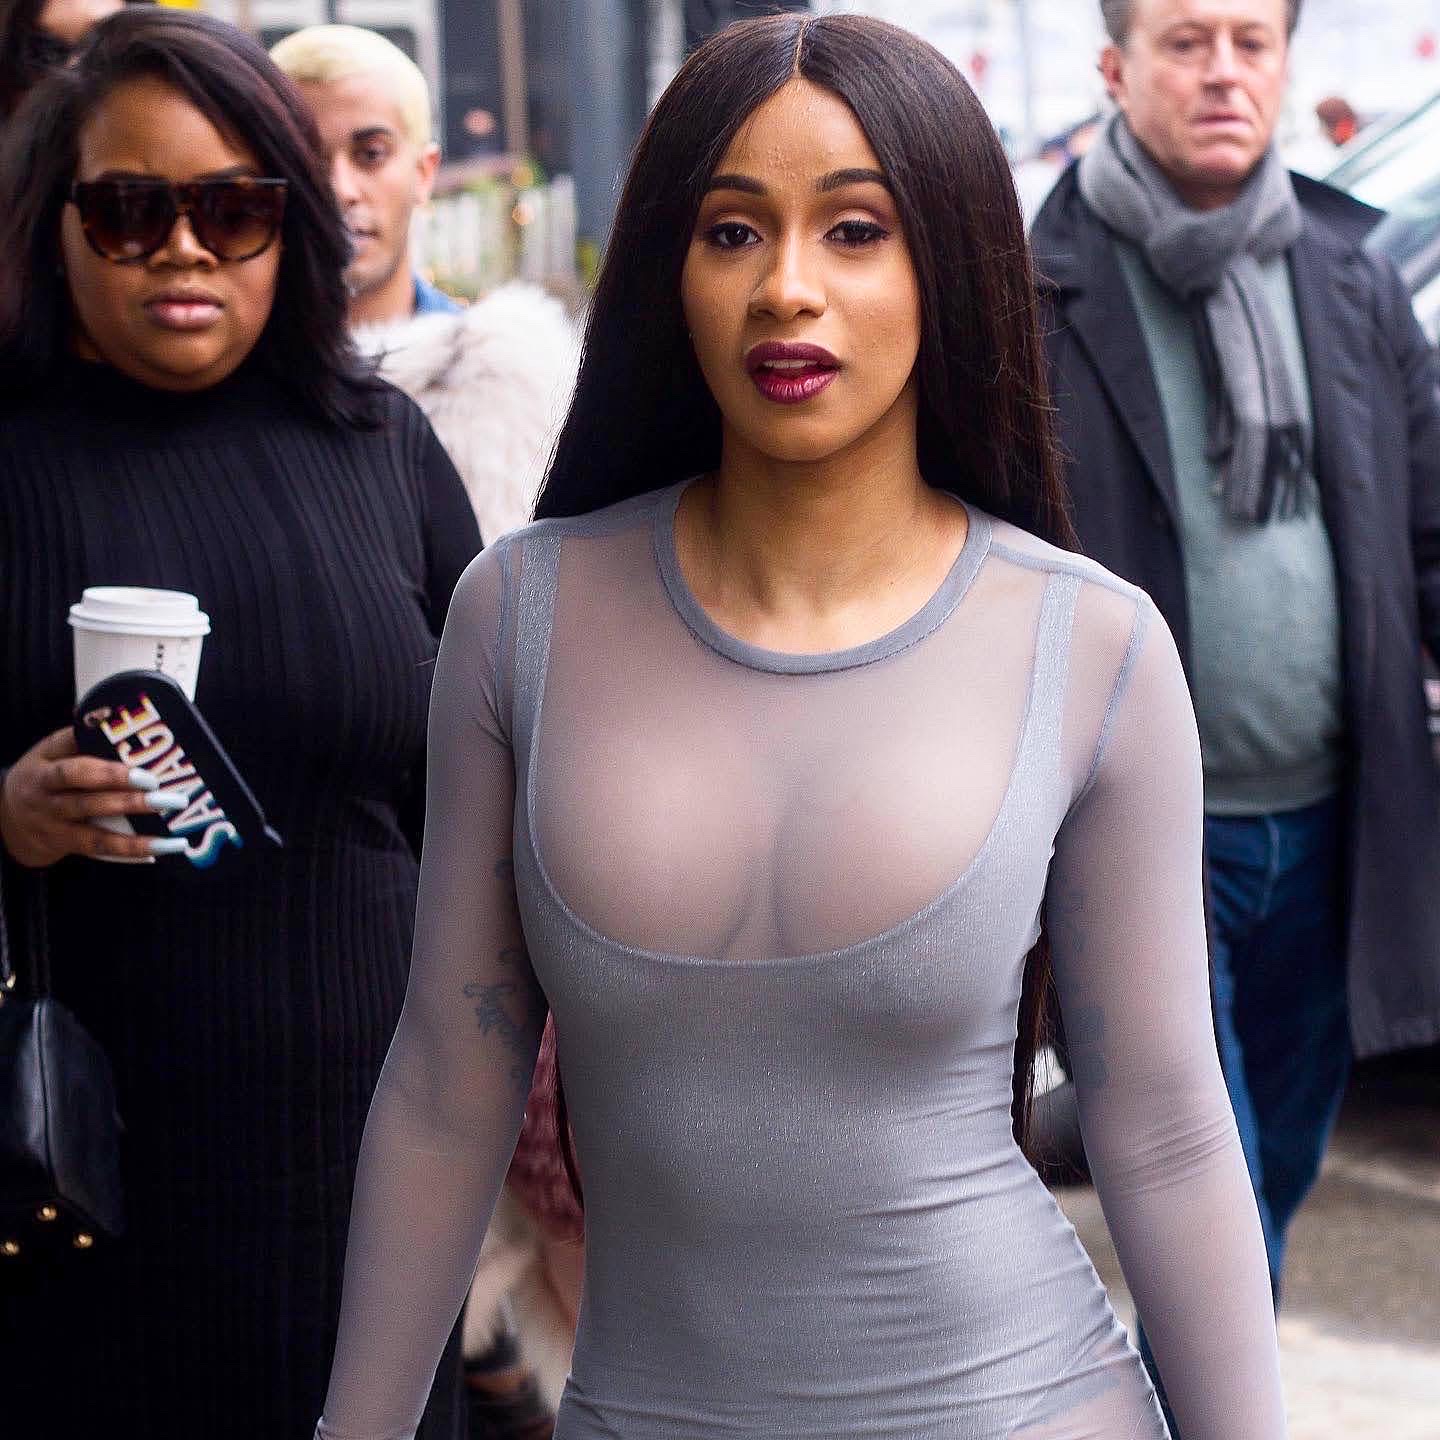 Cardi B accidentally leaks her own nude photo while 